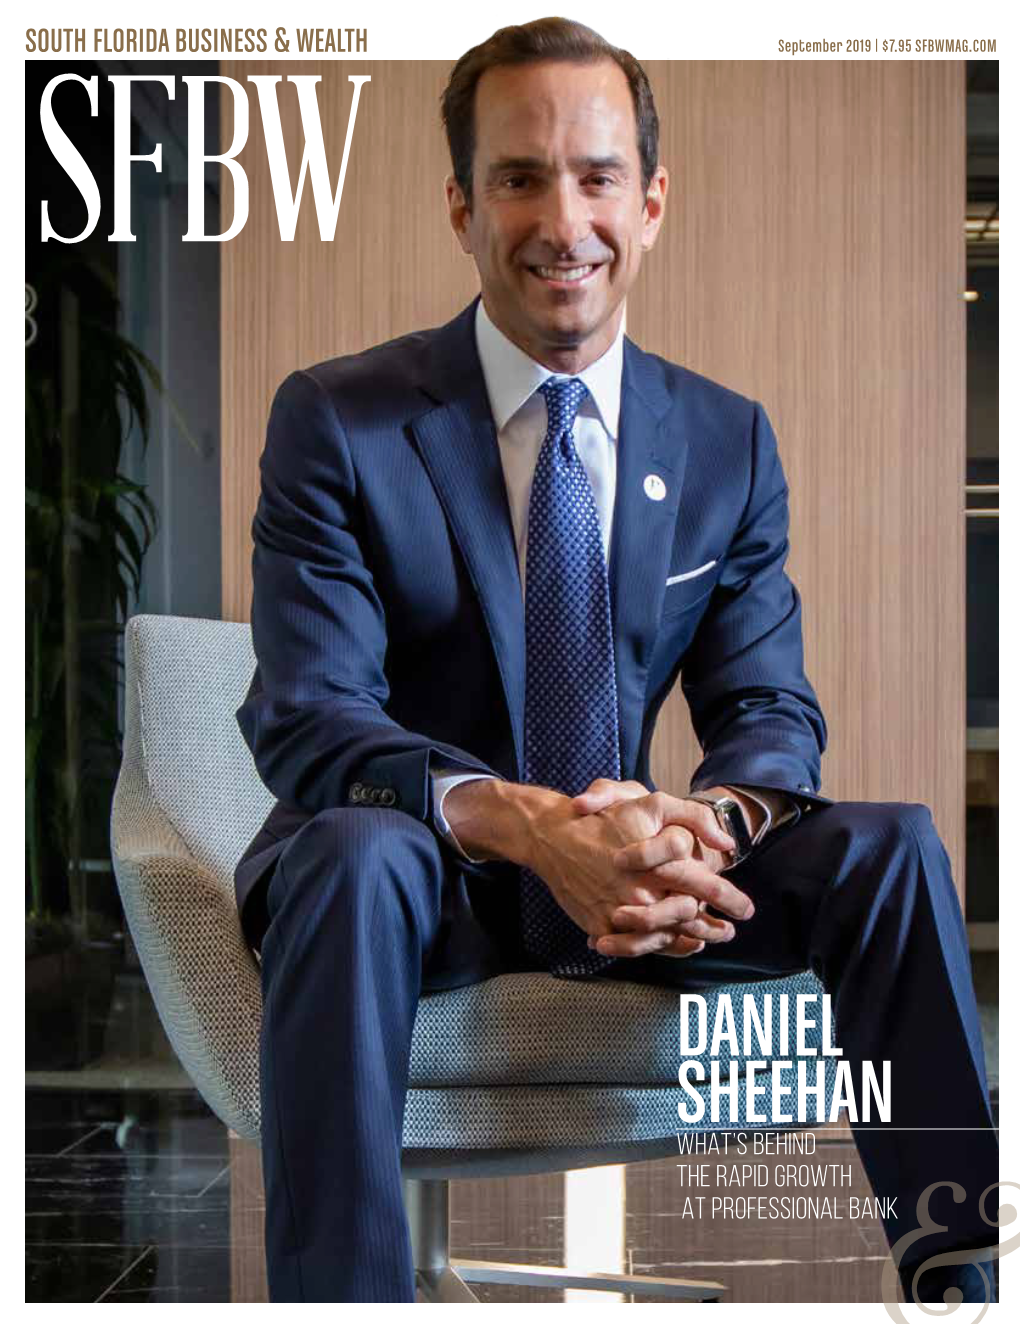 DANIEL SHEEHAN WHAT’S BEHIND the RAPID GROWTH at PROFESSIONAL BANK 2 SEPTEMBER 2019 • a Custom-Fit Investment Plan Is Just a Conversation Away